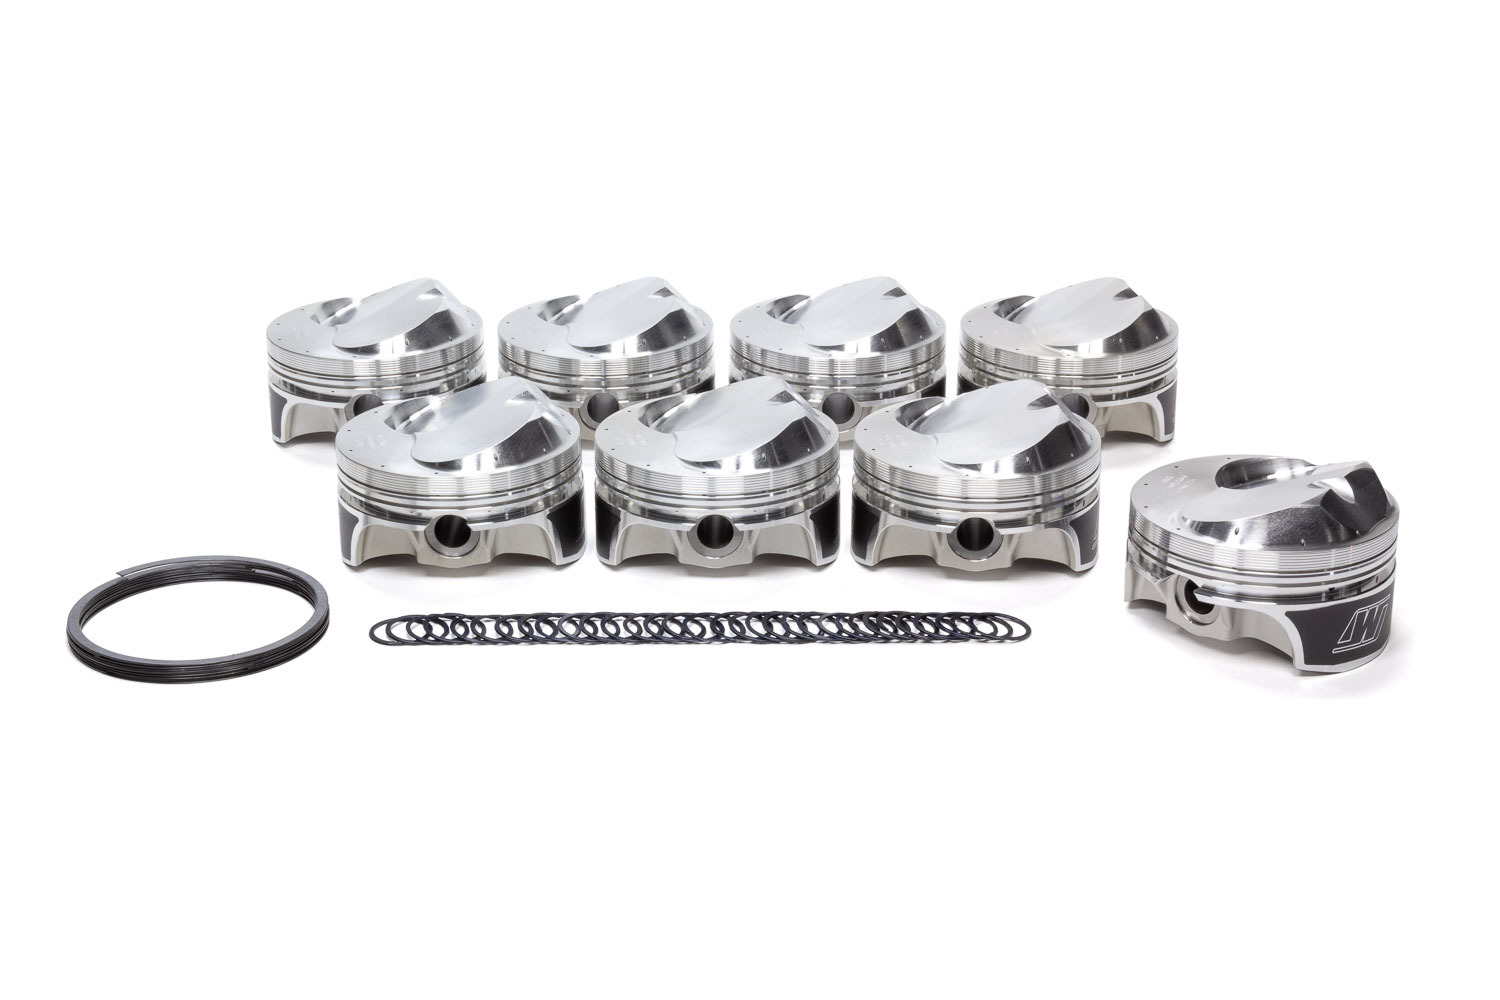 Wiseco Pistons K481BS Piston, Quick 16 Series, Forged, 4.500 in Bore, 0.043 in x 1/16 in x 3/16 in Ring Grooves, Plus 45.00 cc, Big Block Chevy, Set of 8